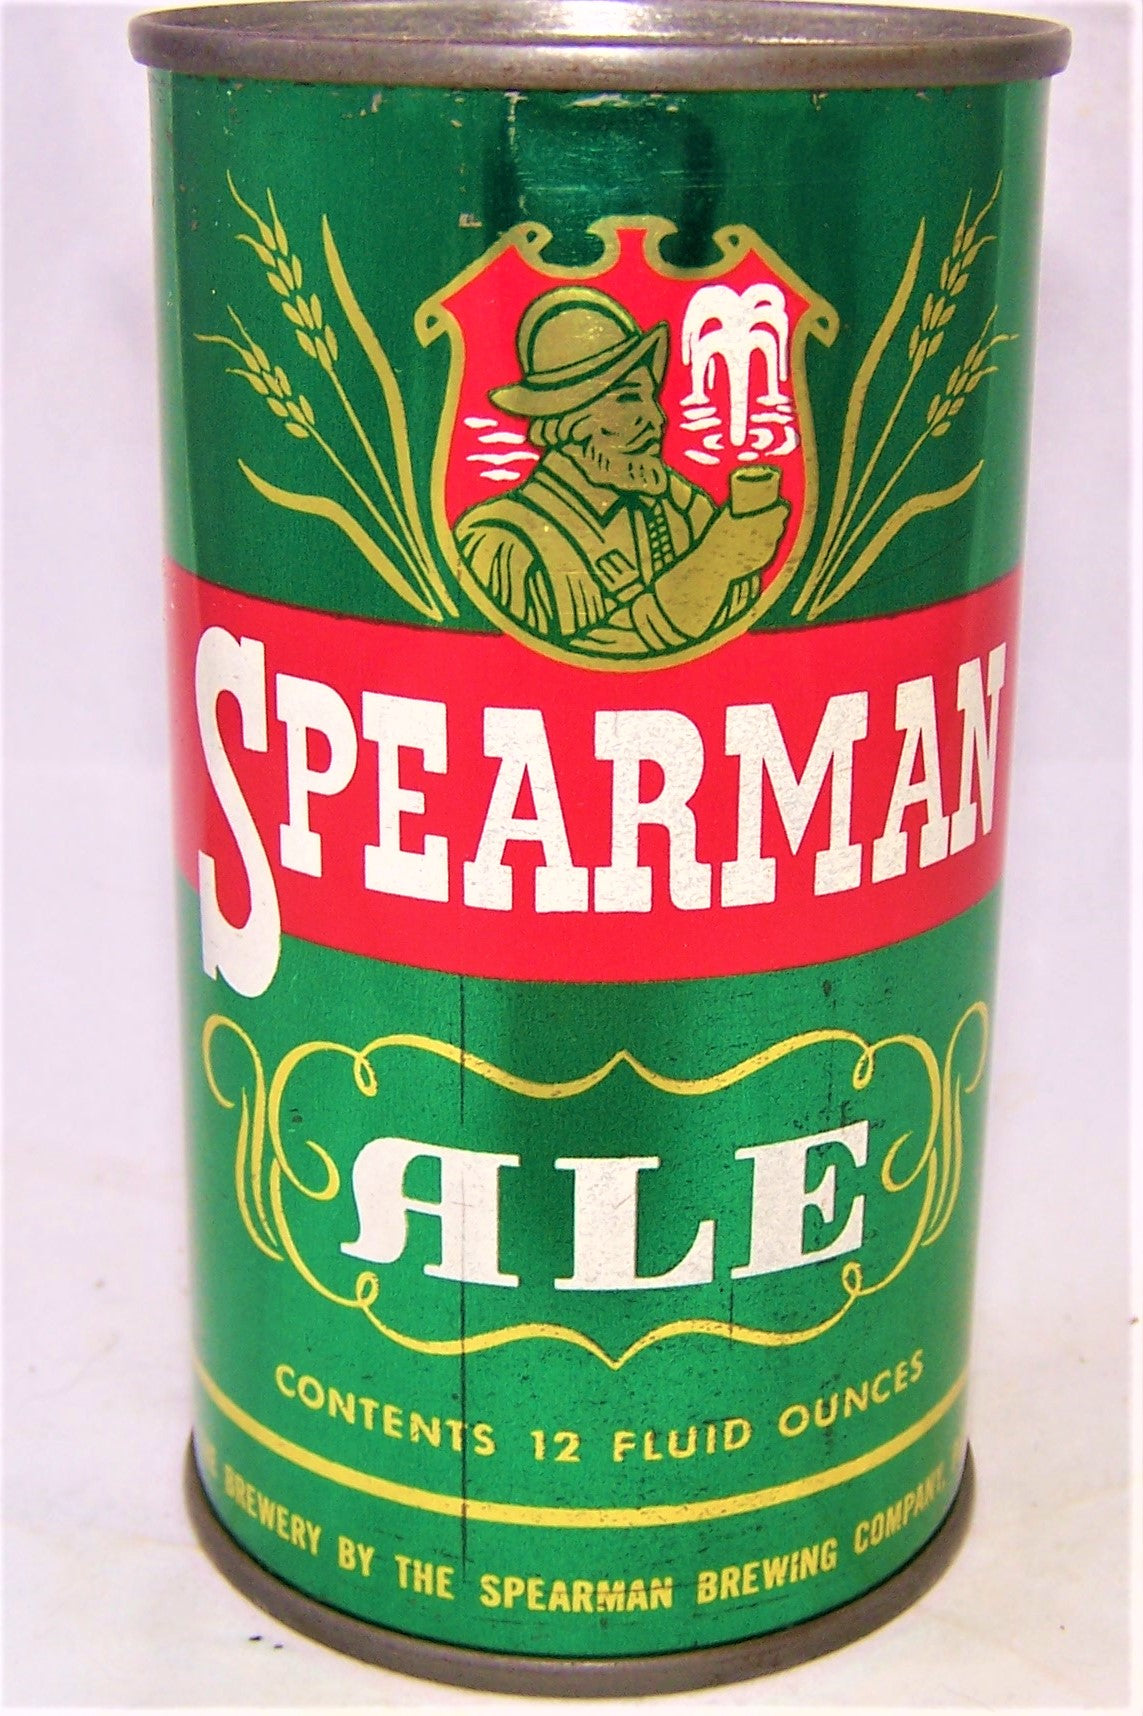 Spearman Ale, USBC 134-31, Grade 1 to 1/1+ Sold on 04/04/19